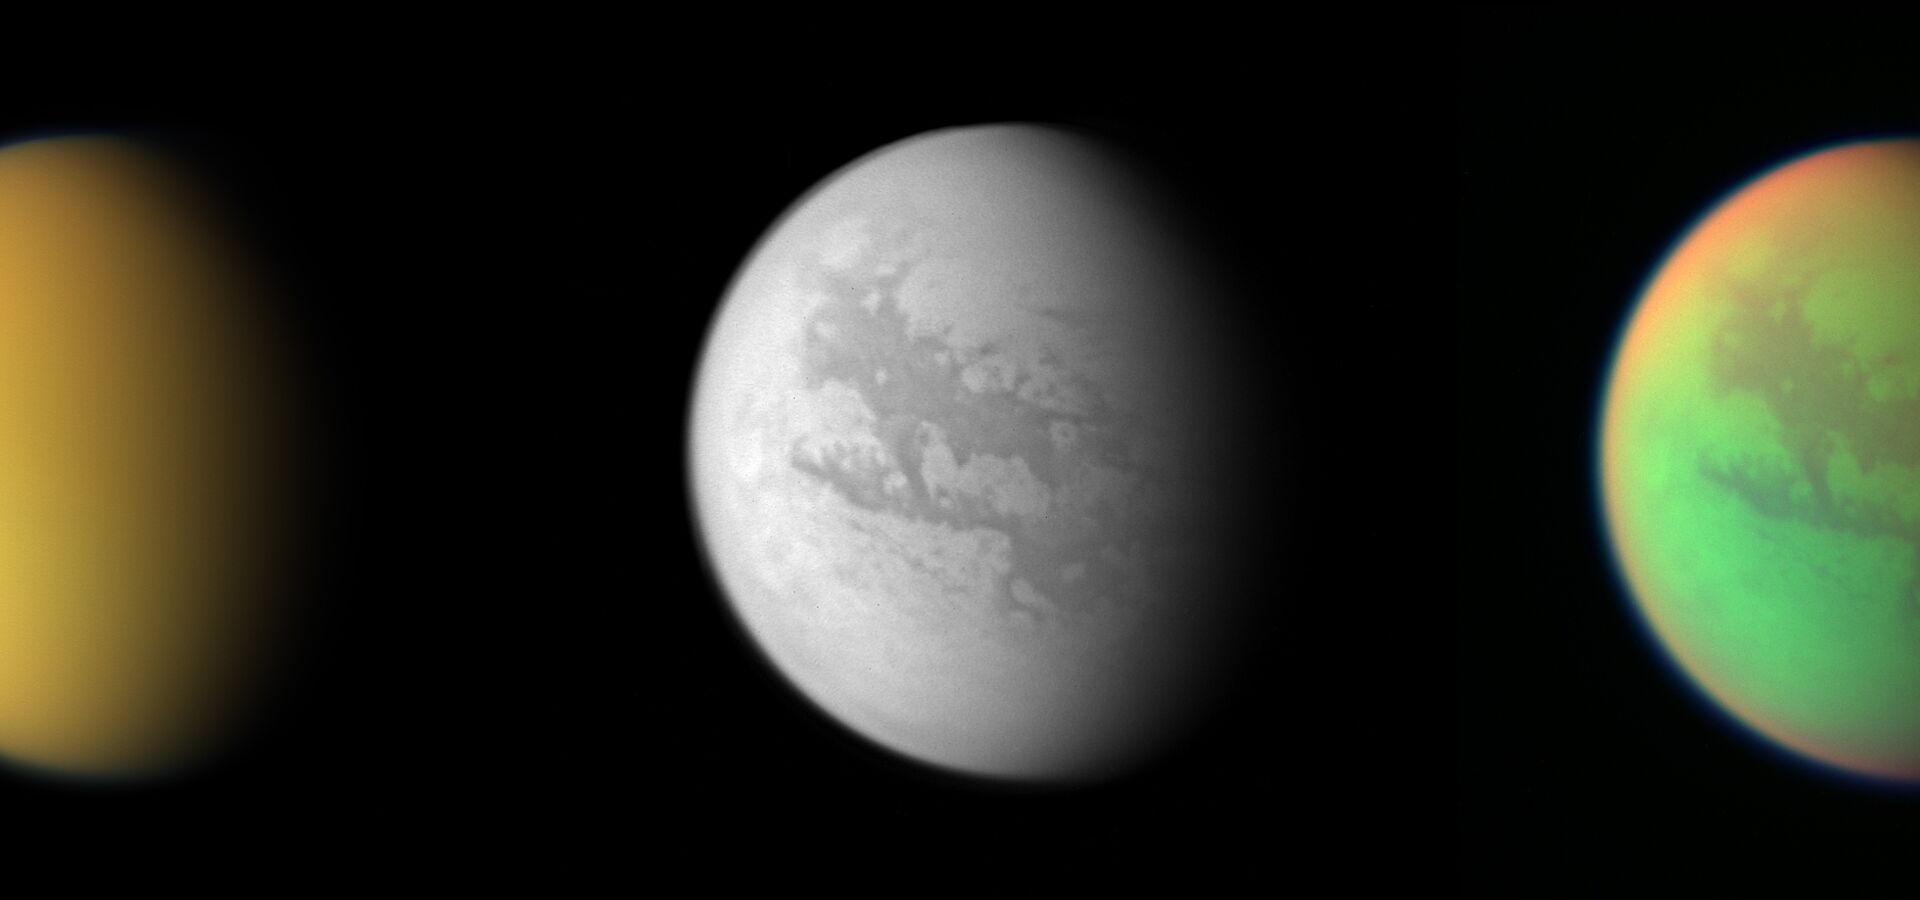 Forecast for Titan: Using Stars to Study Atmosphere on Saturn’s Moon